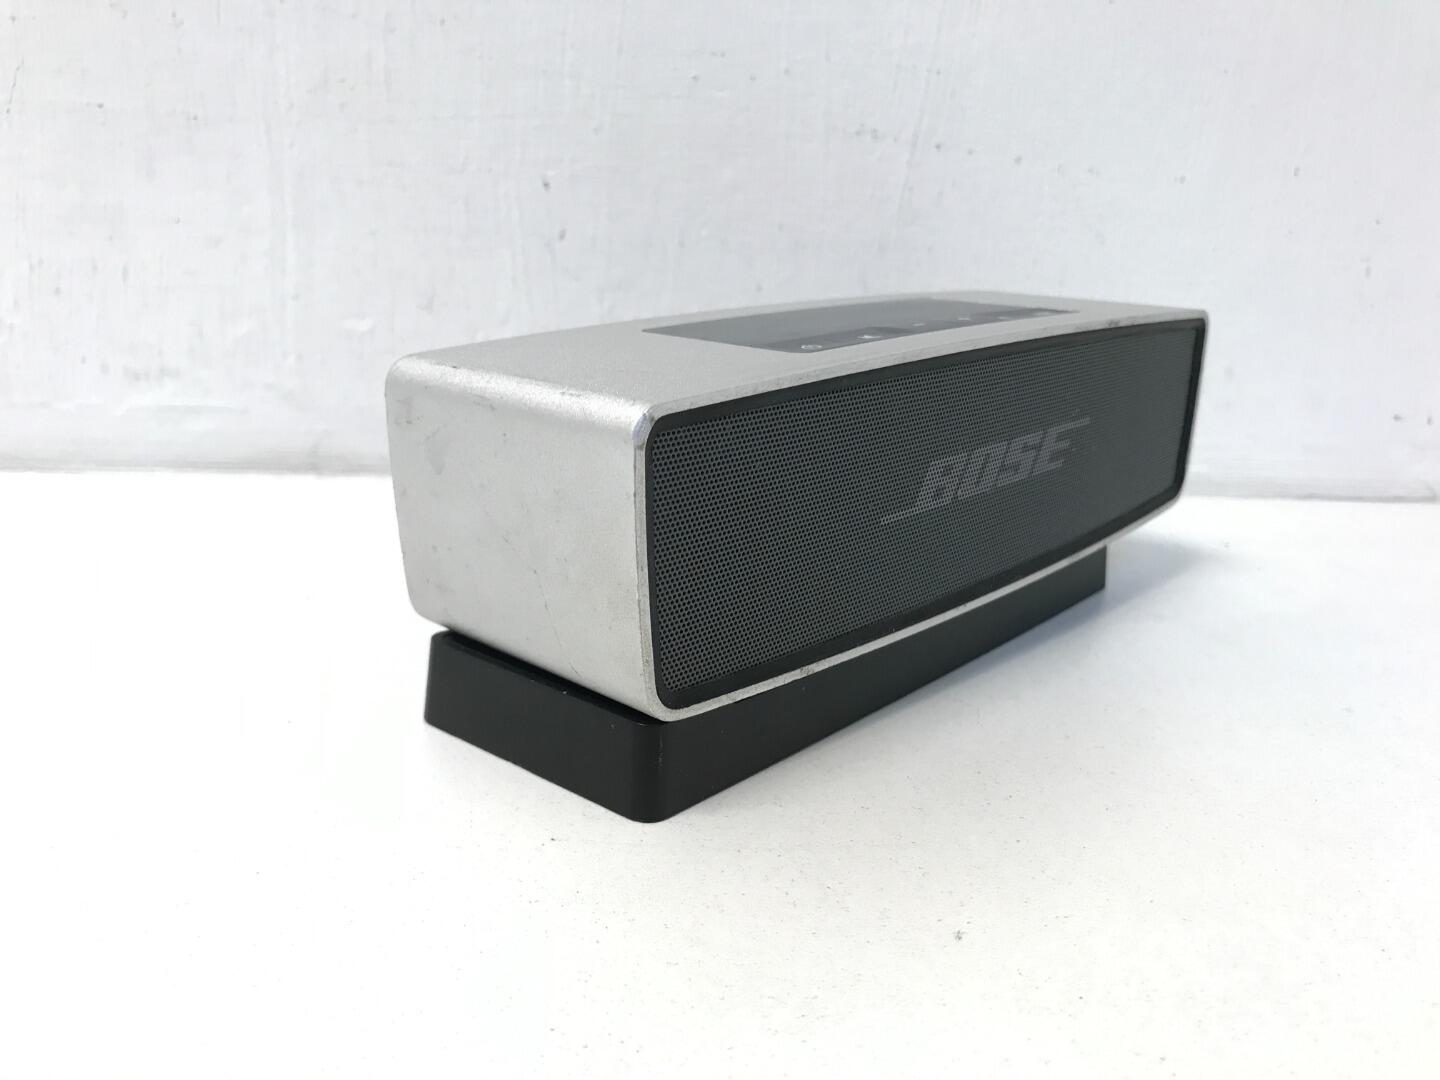 Bose SoundLink Color review: A playful Bluetooth speaker that delivers  serious sound for its size - CNET